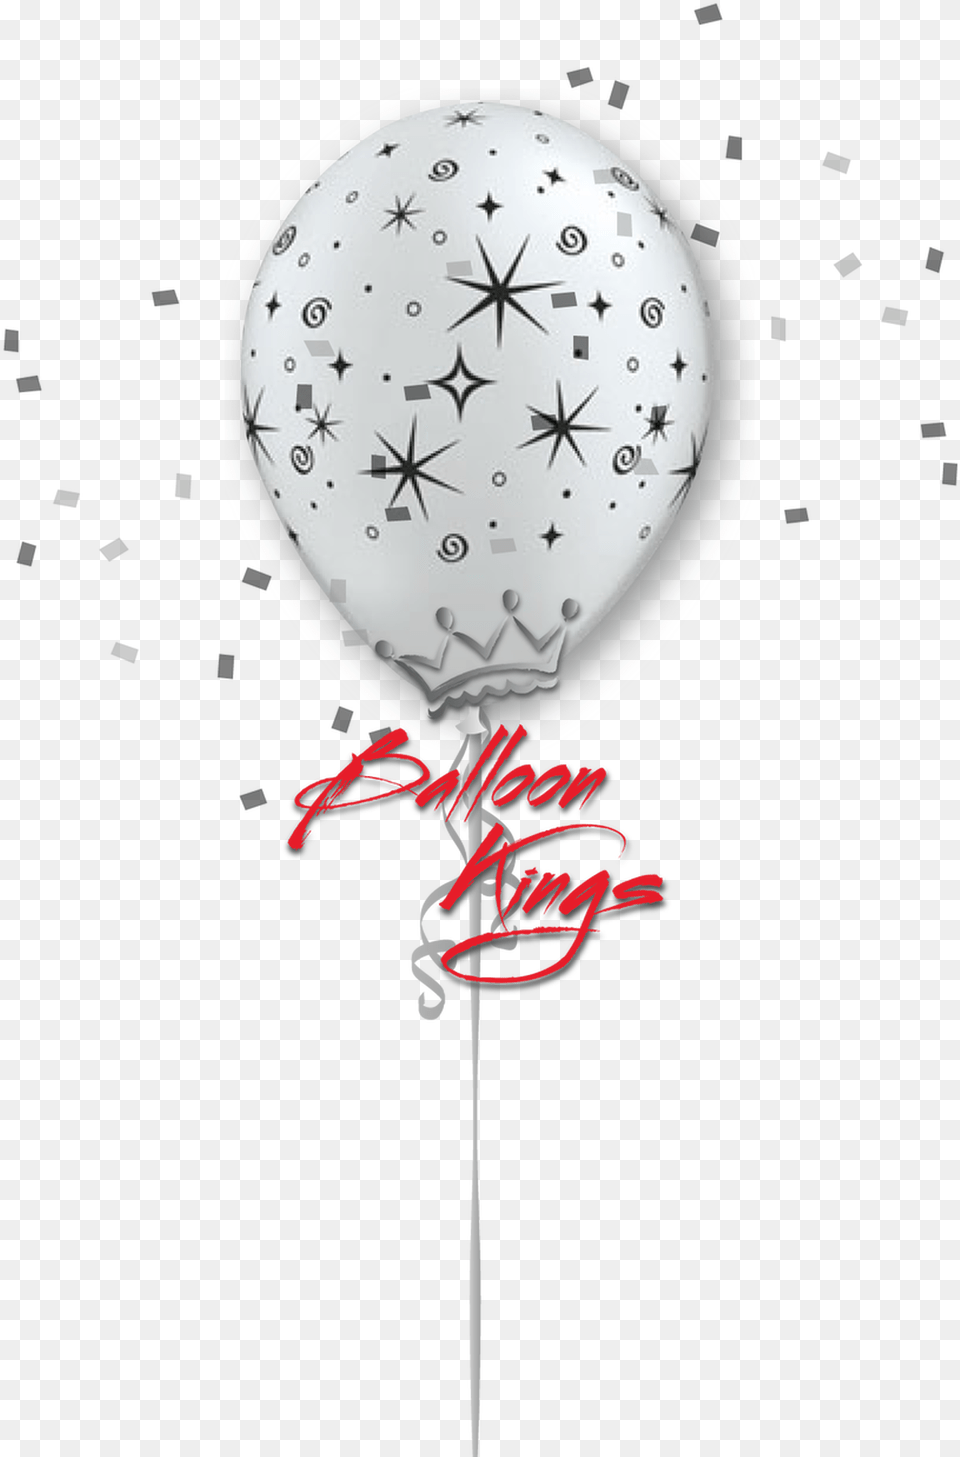 Sparkles Silver Picsart Editing Background, Balloon, Flower, Plant Png